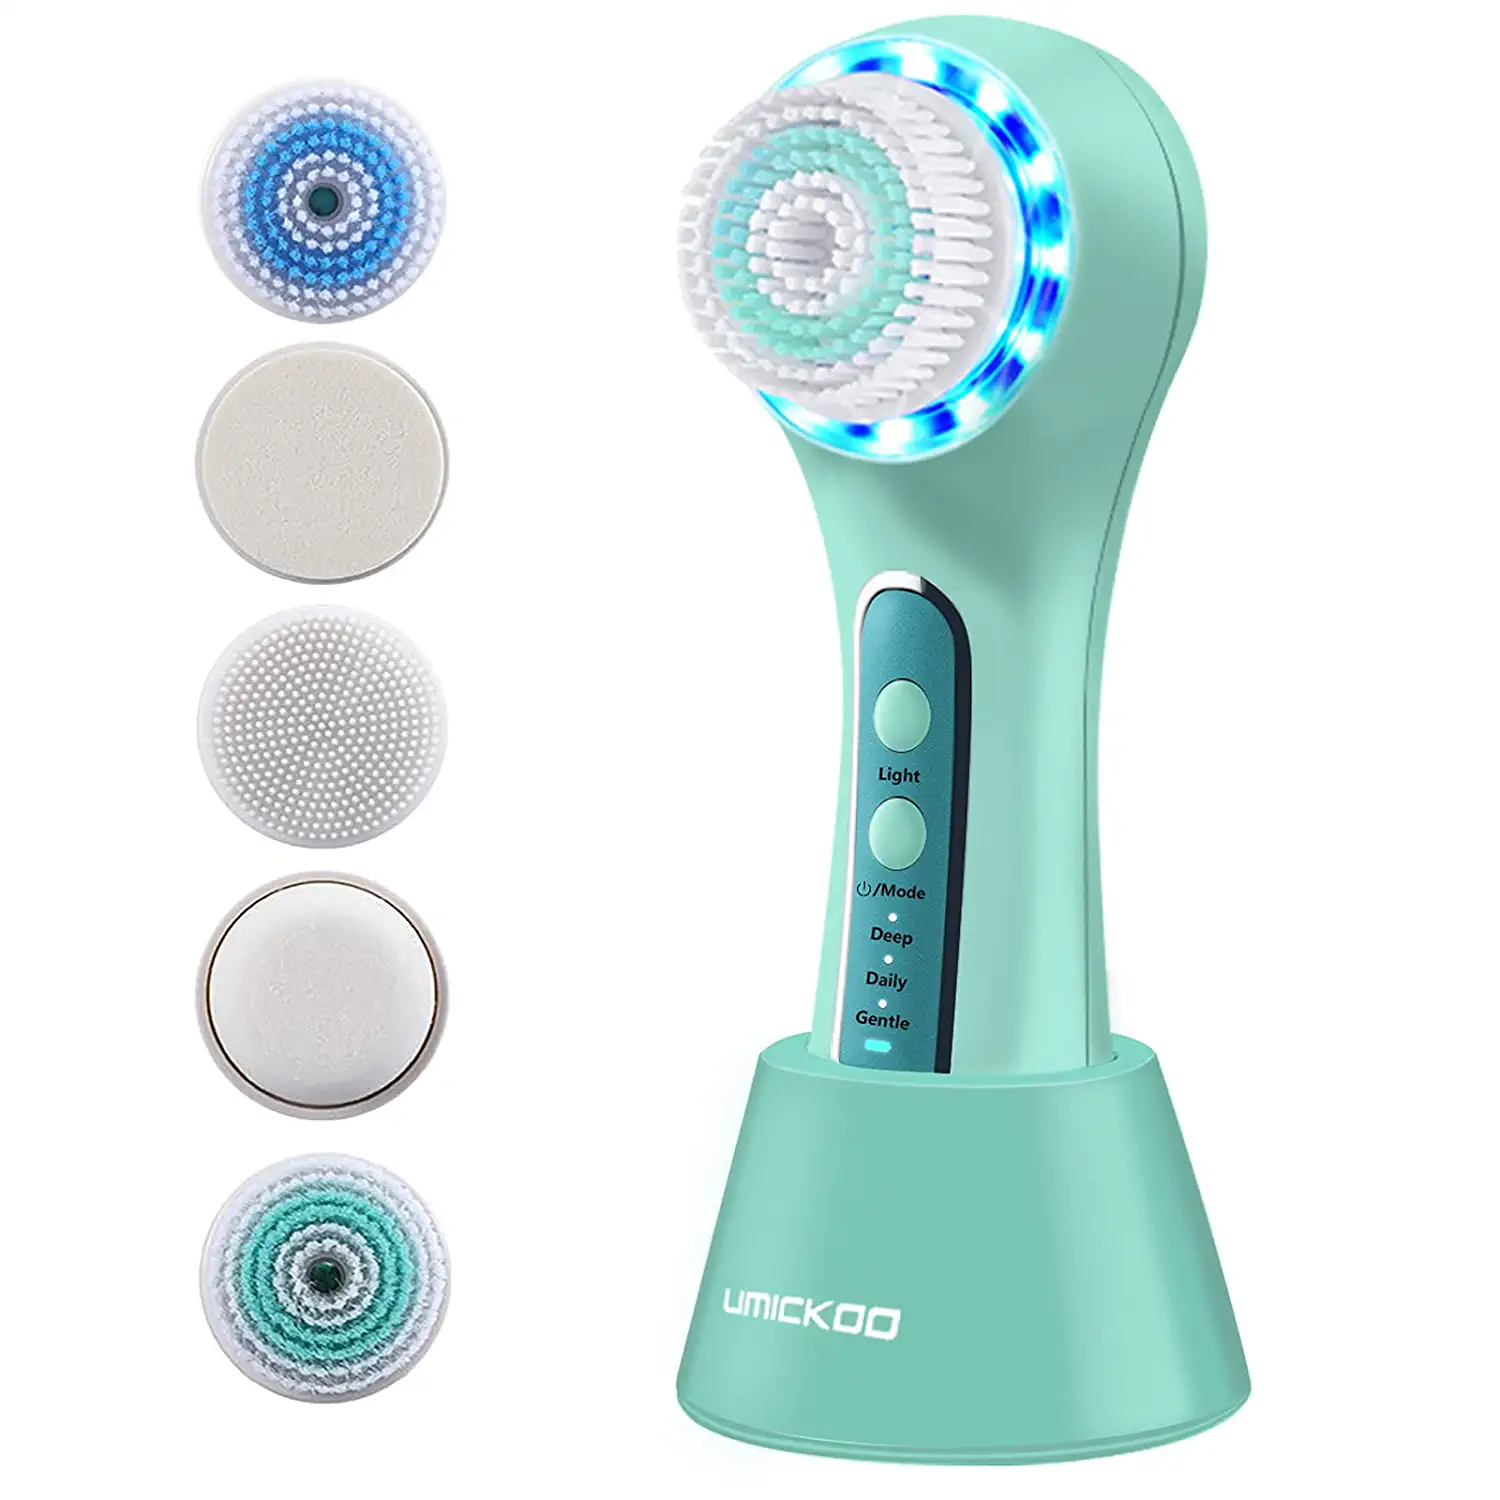 UMICKOO IPX7 Waterproof Facial Cleansing Brush